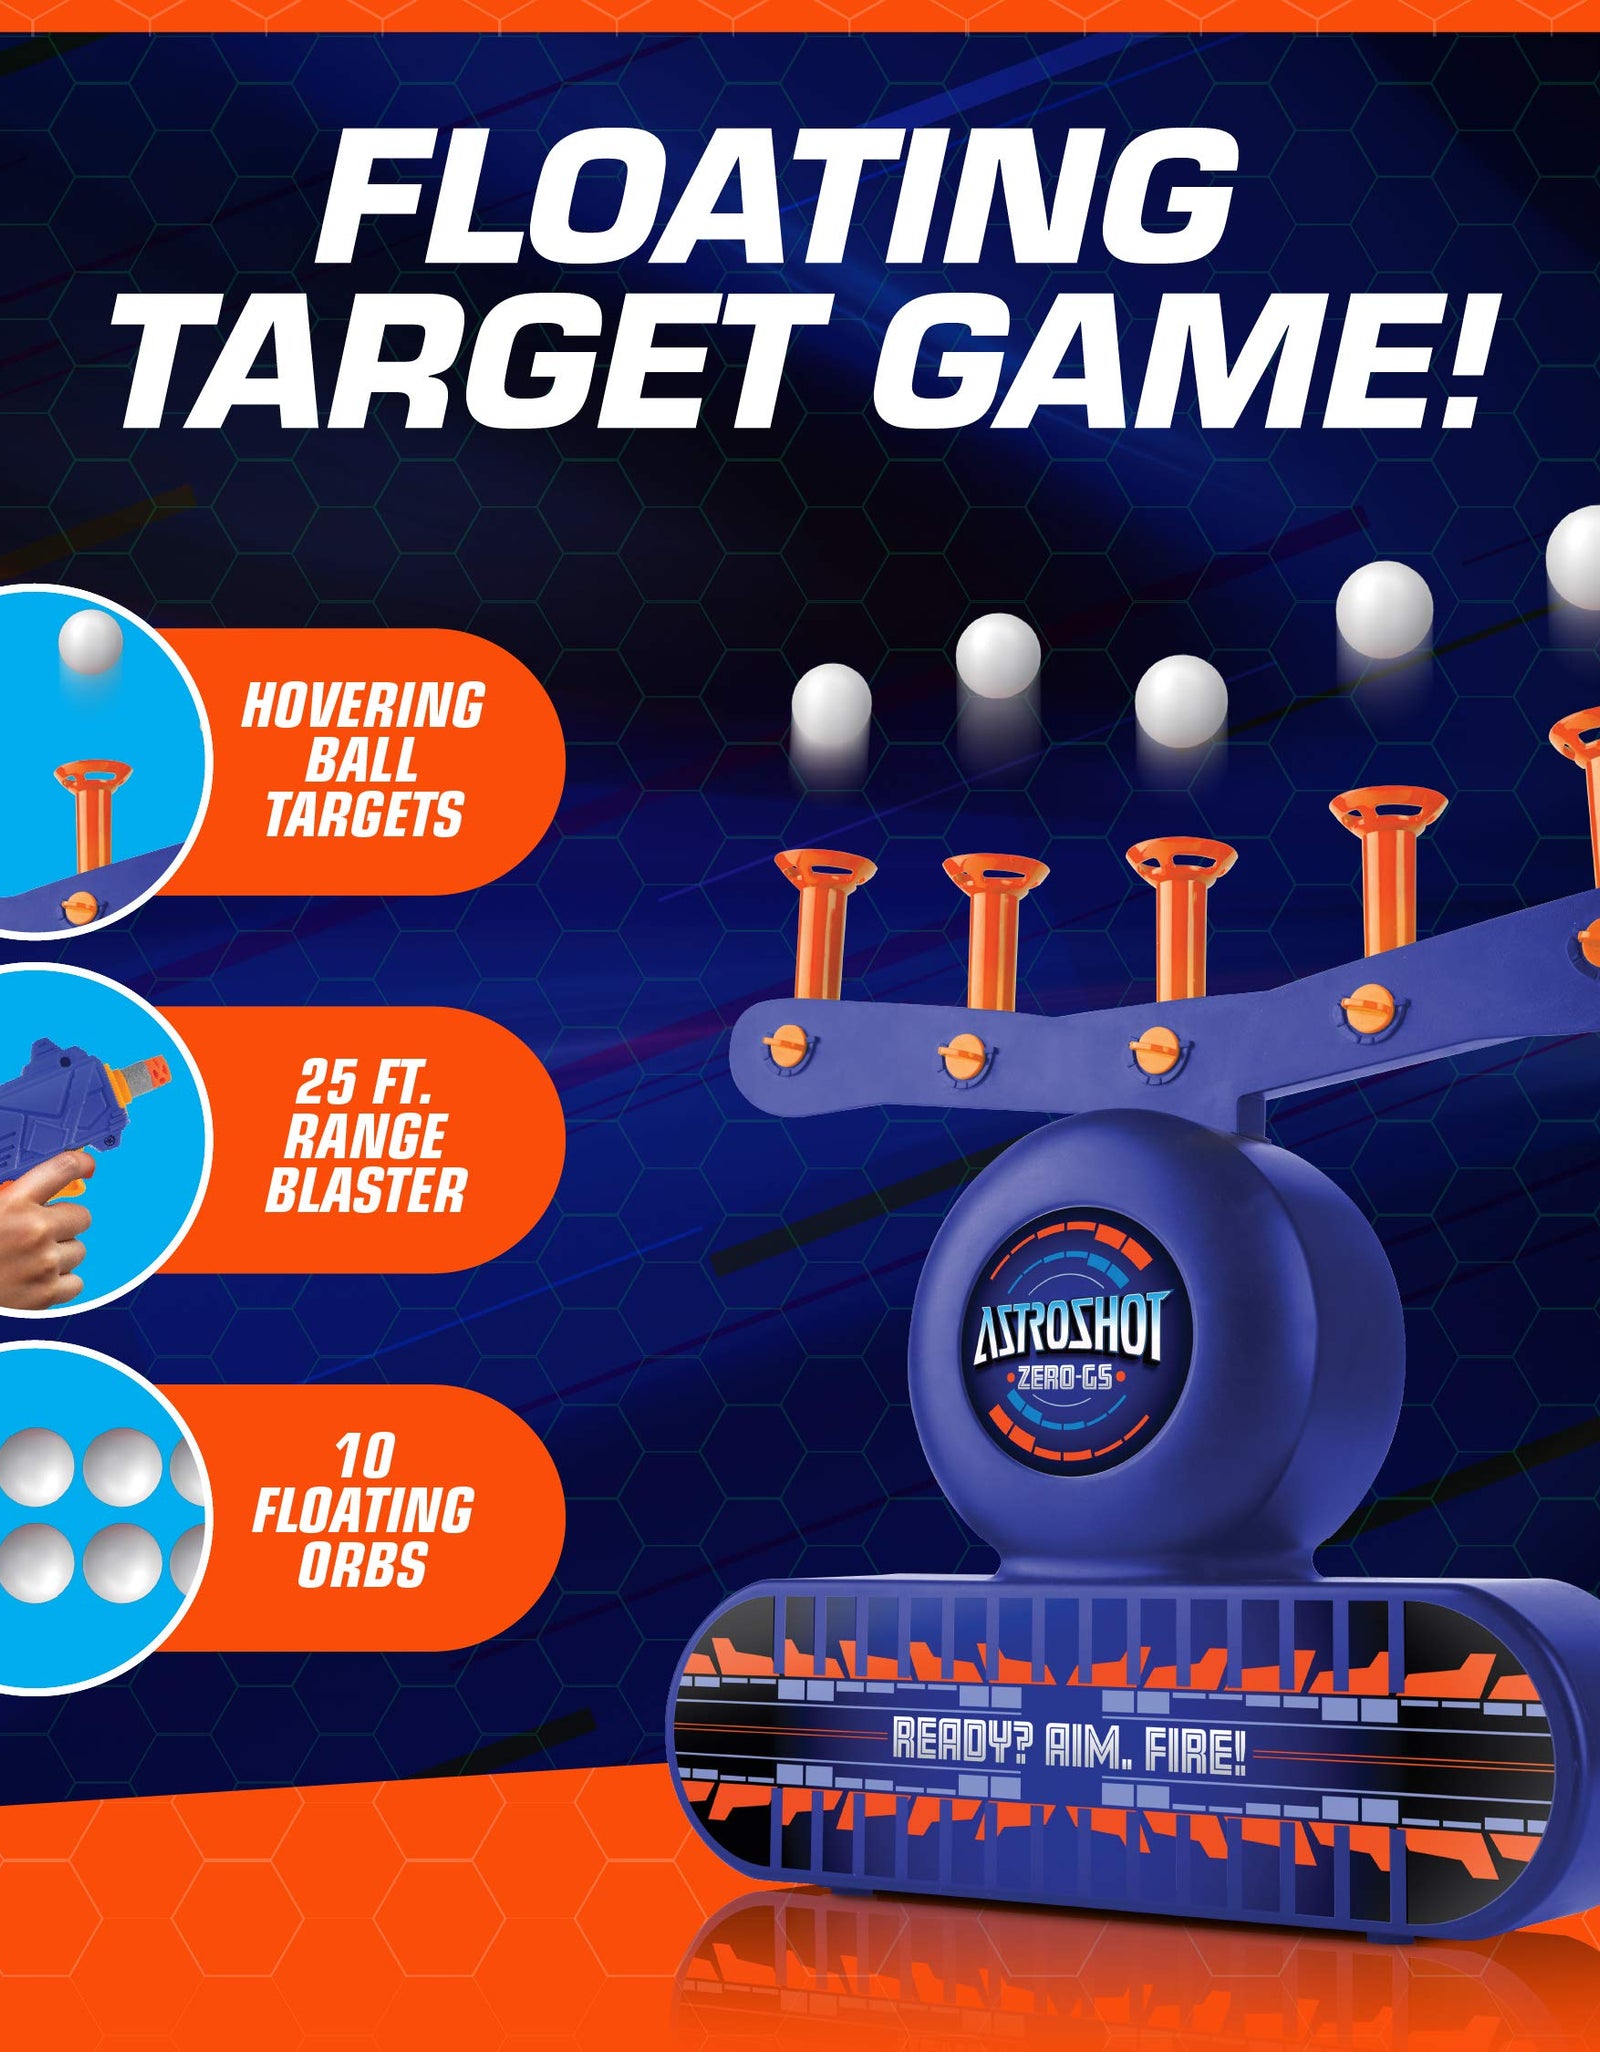 USA Toyz AstroShot Zero GSX Shooting Games for Kids - Nerf Compatible Glow in The Dark Floating Ball Targets for Shooting with Foam Blaster Toy Gun, 10 Floating Ball Targets, and 5 Flip Targets